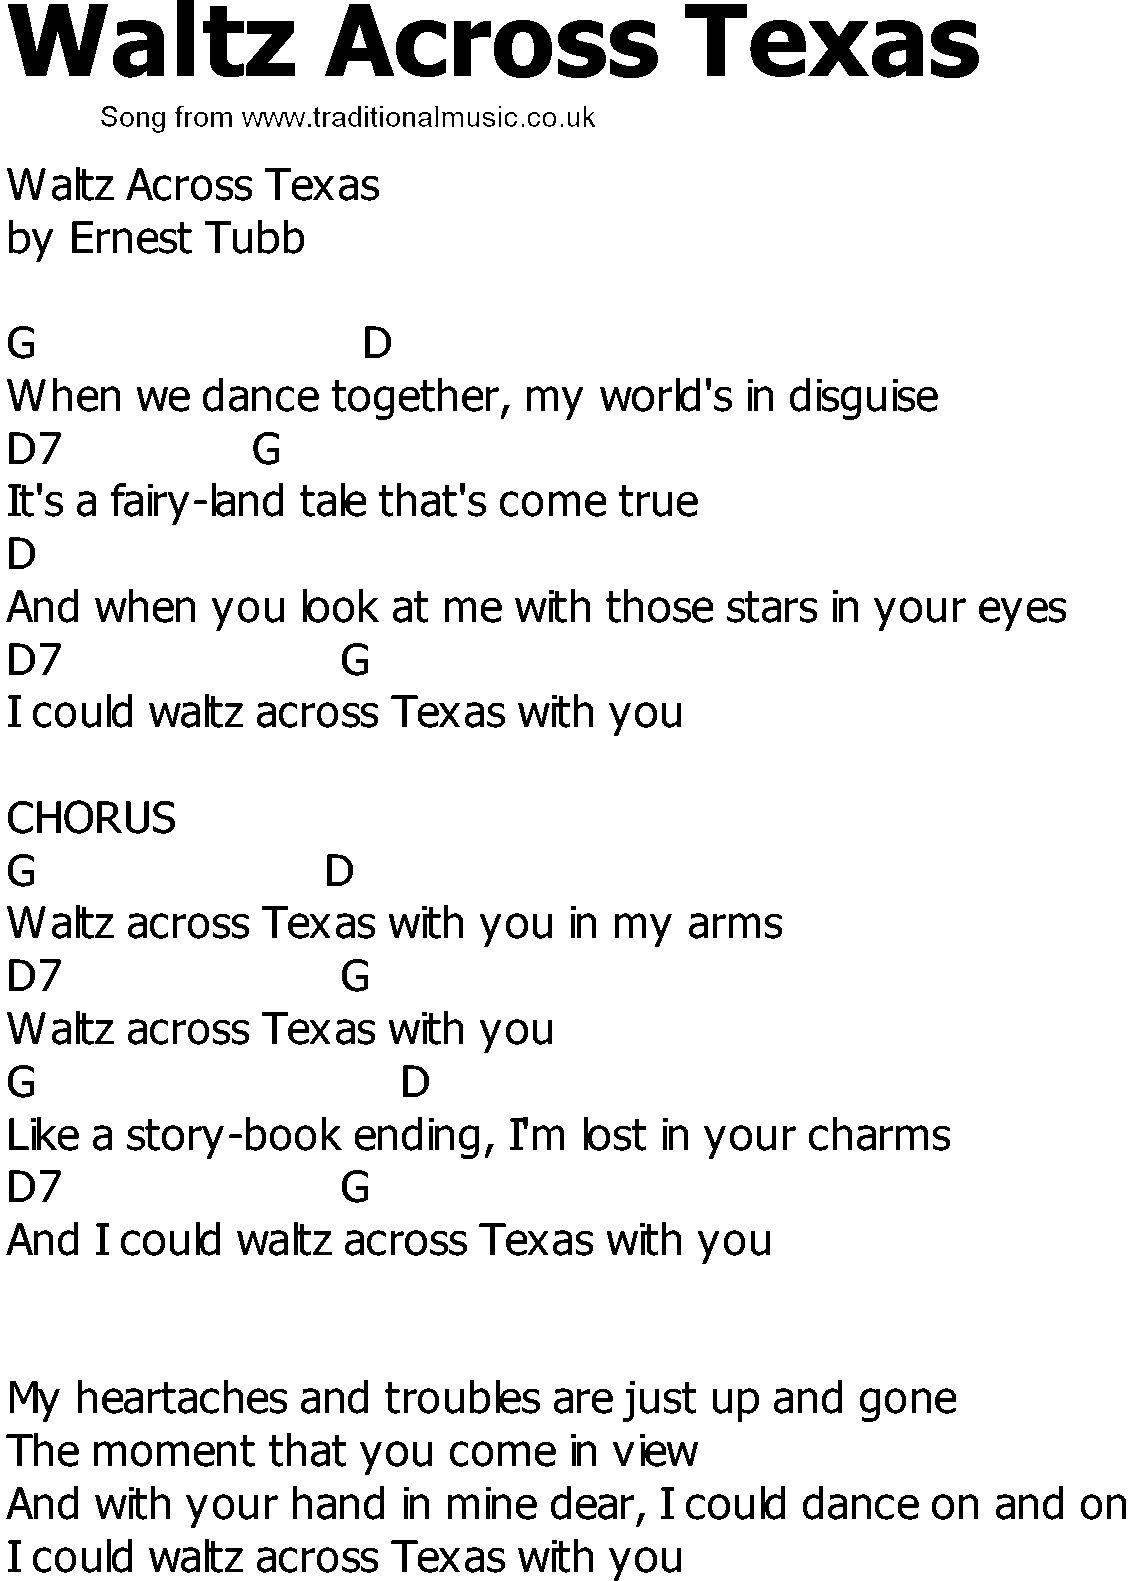 Old Country song lyrics with chords - Waltz Across Texas